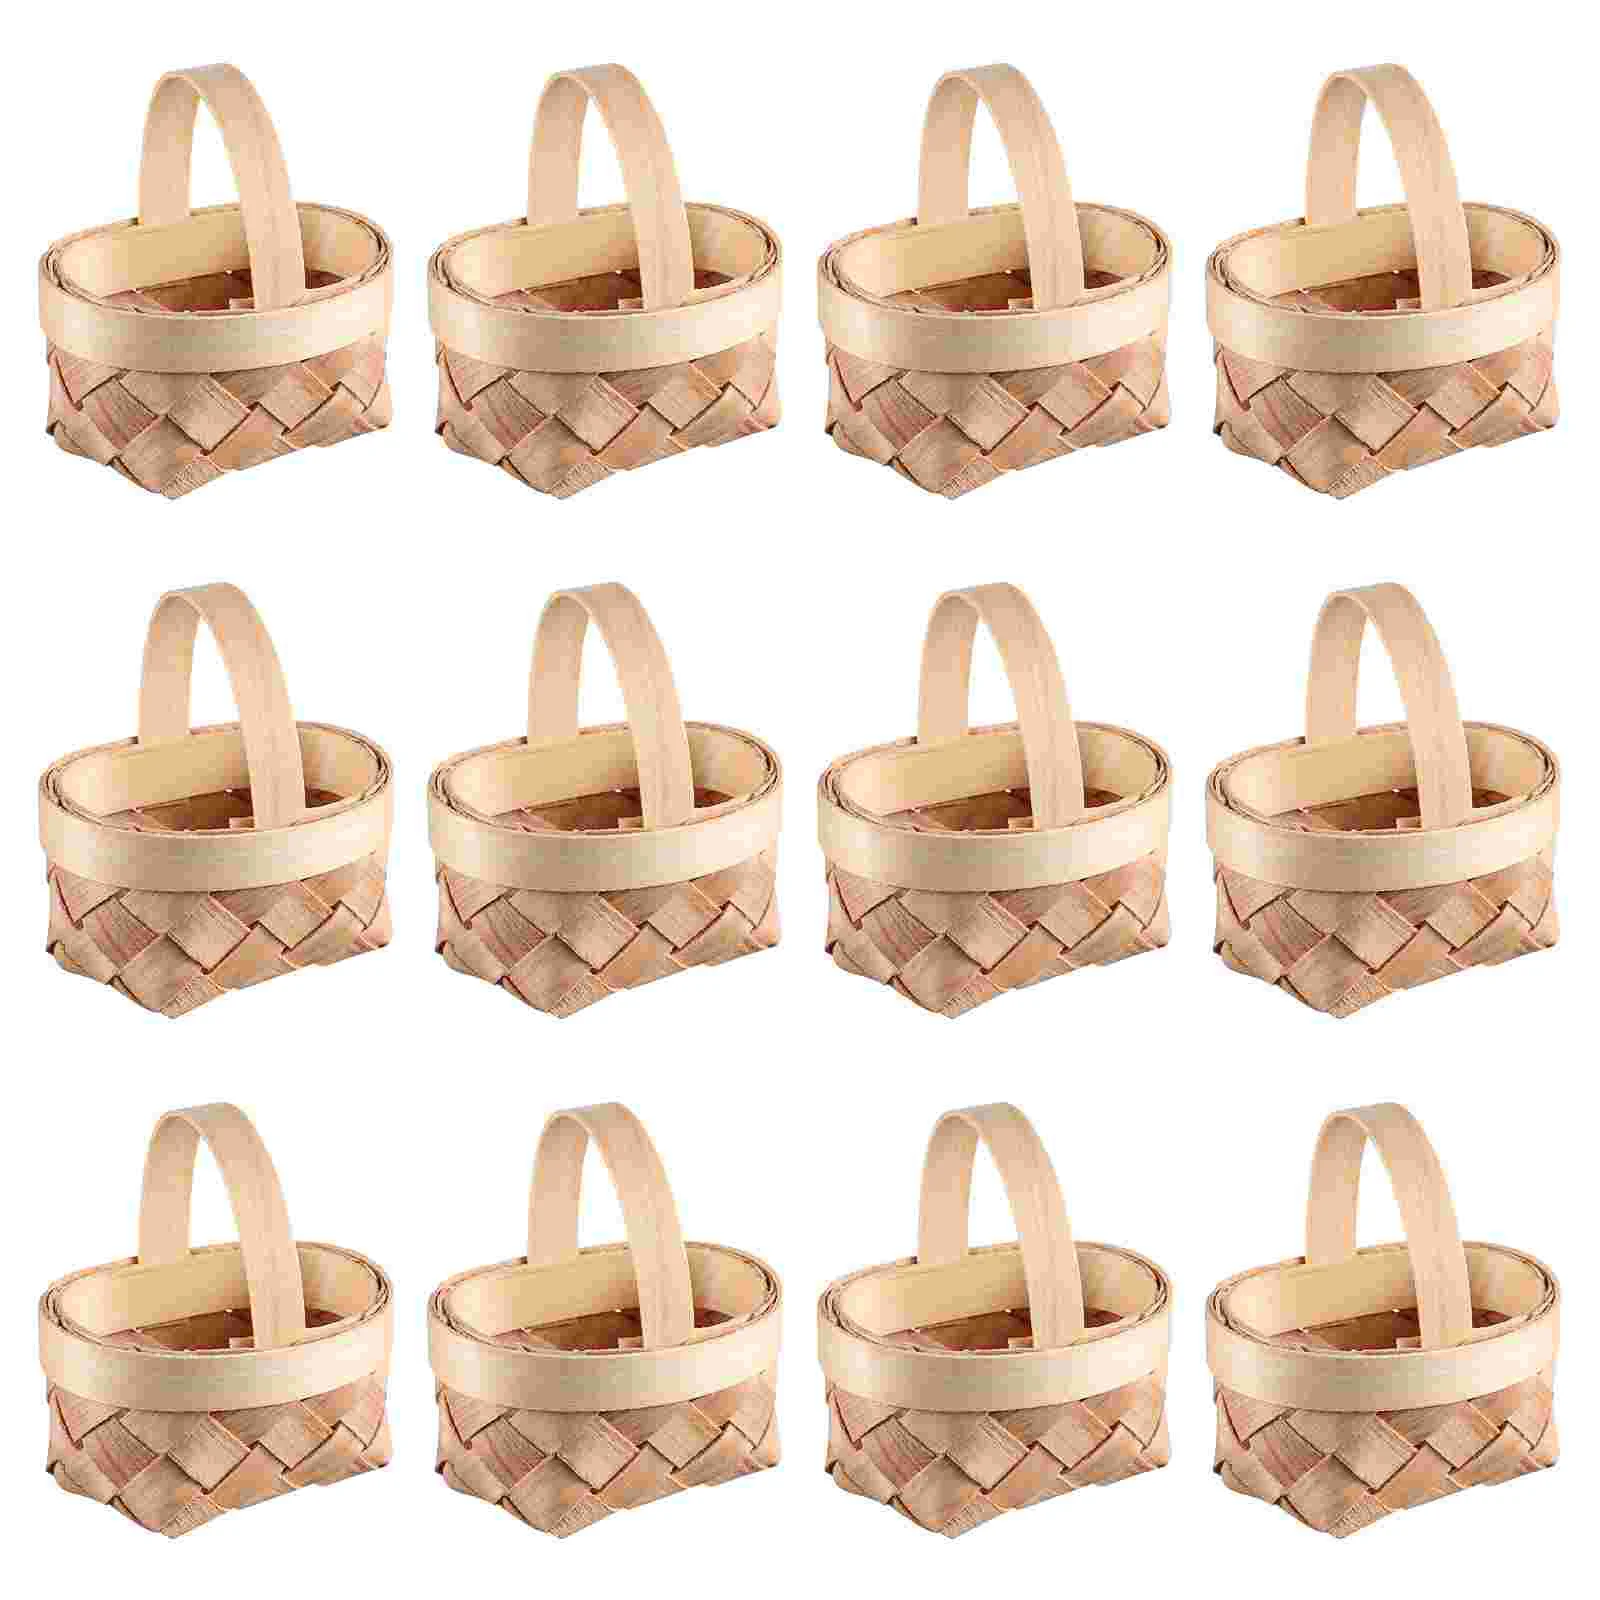 

Basket Mini Baskets Woven Wicker Tiny Chip Easter Candy Gifts Crafts Handle Case Handmade Favors Miniature Craft Favor Wood